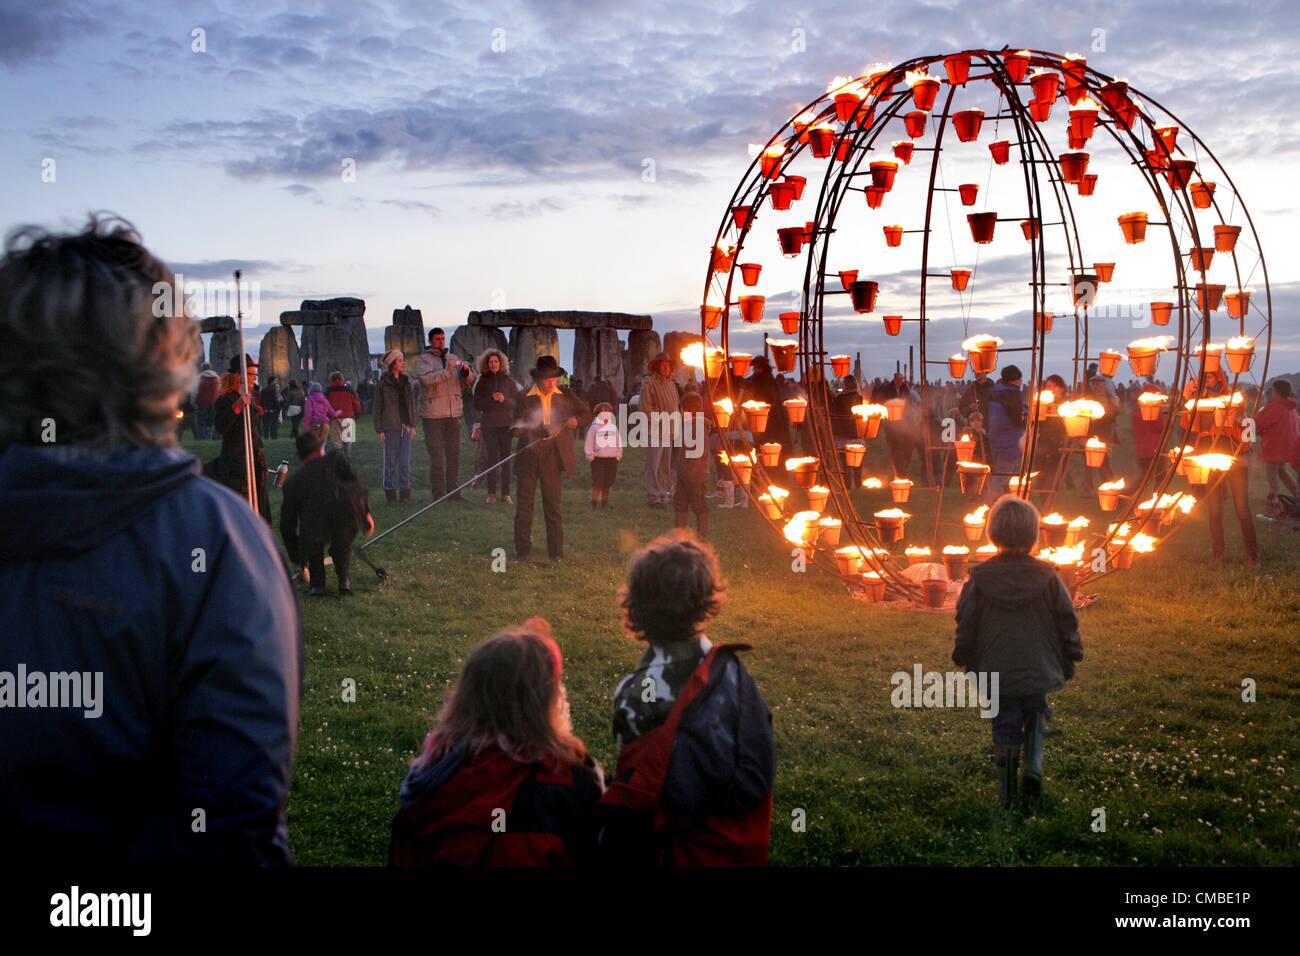 Wiltshire, UK. Tuesday 10th July 2012. Visitors get a close view of part of the Fire Garden at Stonehenge in Wiltshire, UK. French outdoor fire alchemists Compagnie Carabosse present the FIRE GARDEN at the World Heritage Site Stonehenge in Wiltshire on 10th - 12th July as part of the London 2012 Festival. Stock Photo